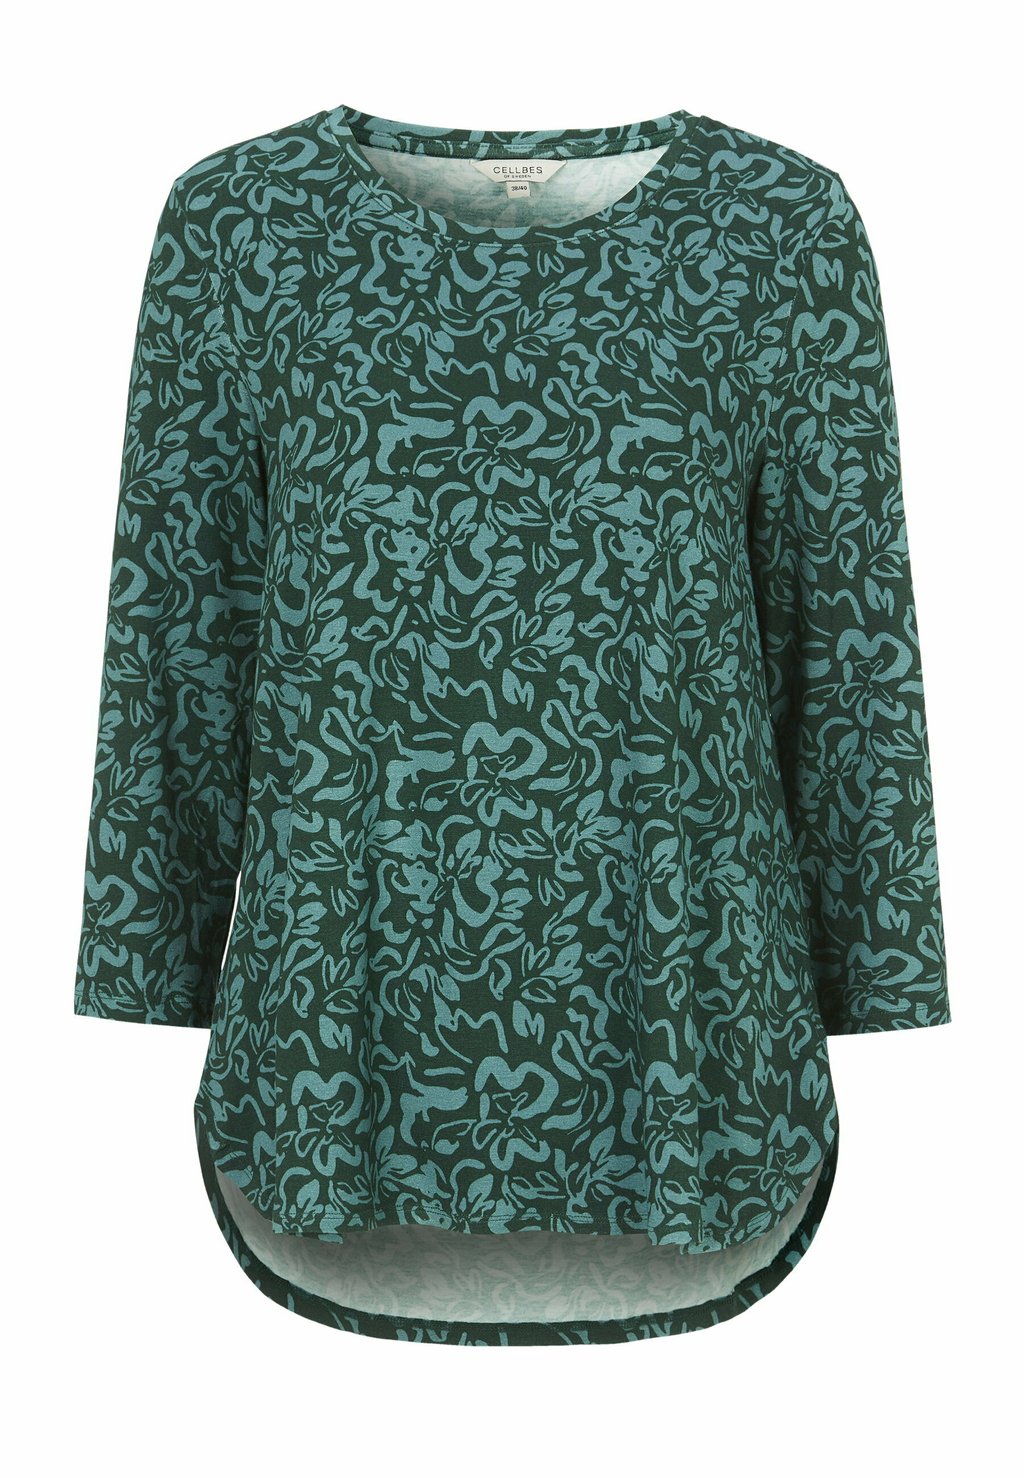 Футболка с принтом WITH 3/4 SLEEVE Cellbes Of Sweden, цвет green patterned patterned knitwear womens polo collar patterned coat green color floral patterns stylish appearance quality wool fabric form